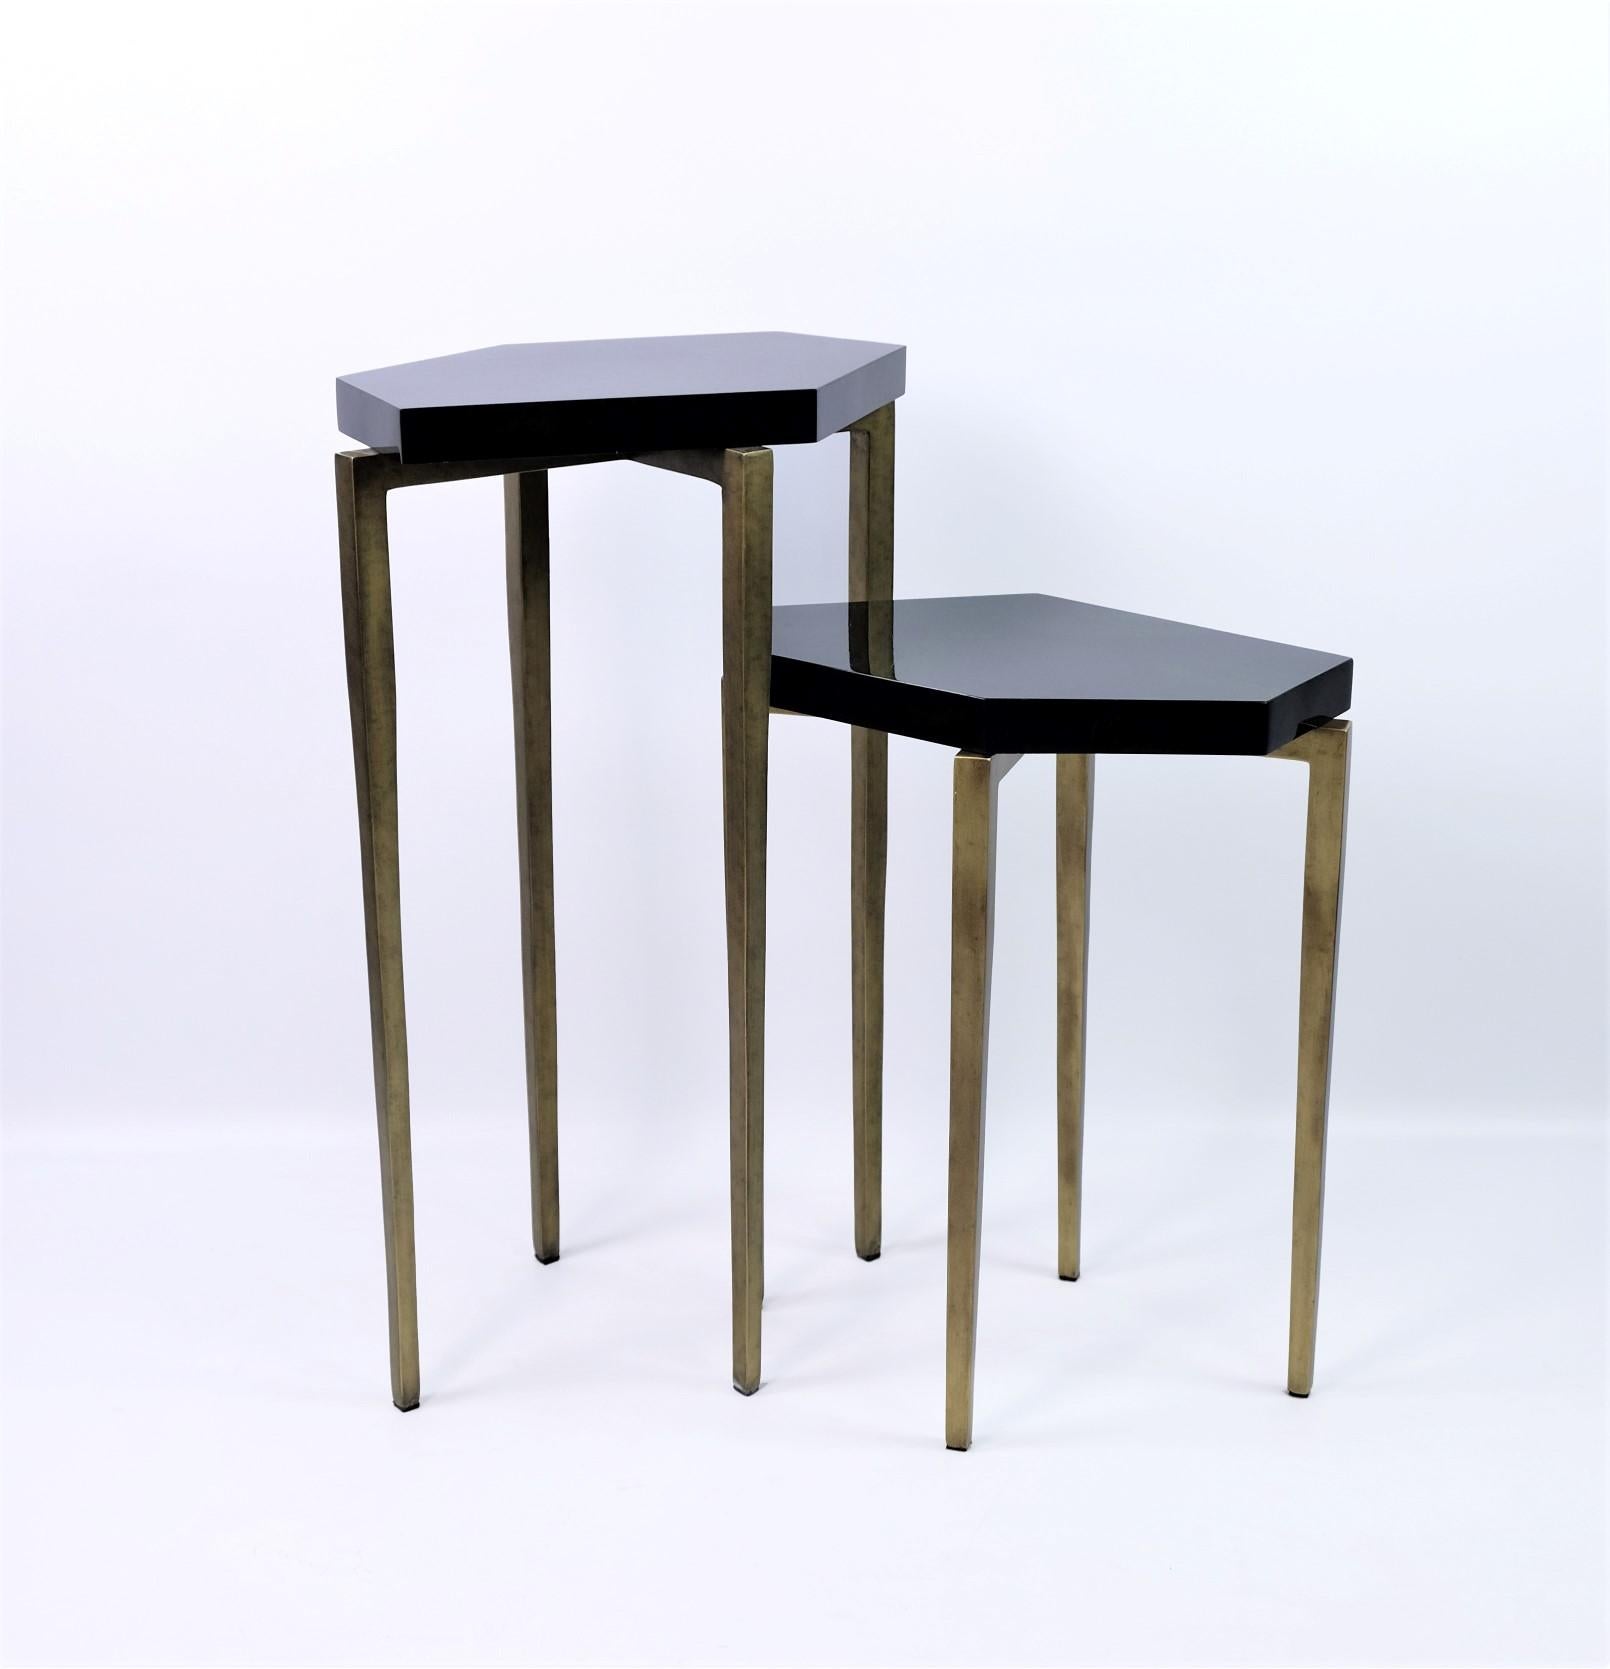 These futurist nesting tables are made of polished green shell marquetry.

They have a polygonal shape top and the metal feet have an antique brass patina.

The tables are small and very versatile. These can be placed anywhere near a sofa and